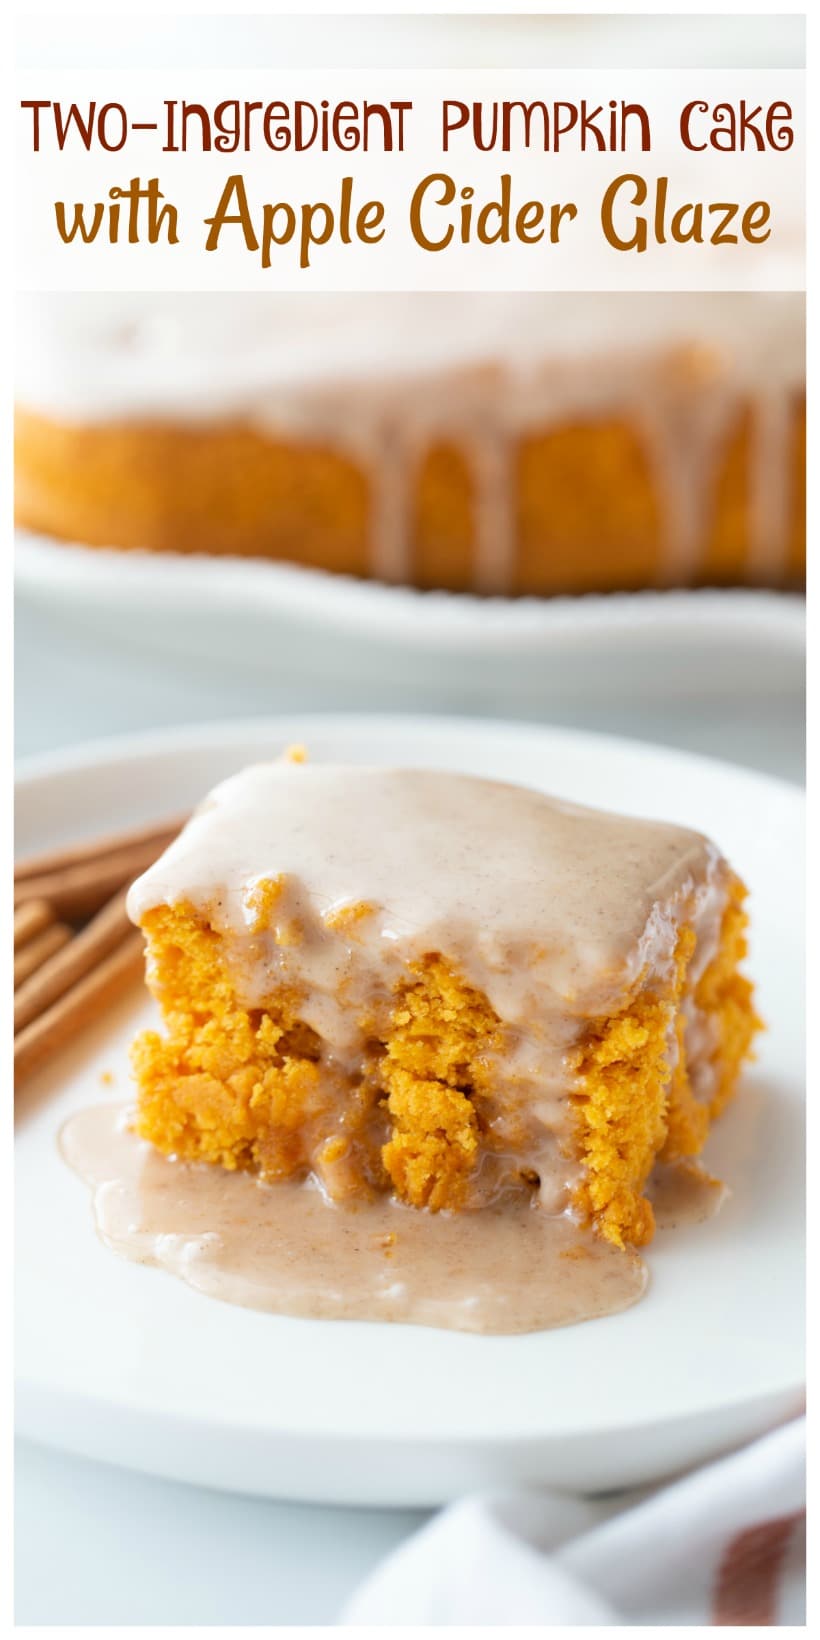 This Two-Ingredient Pumpkin Cake with Apple Cider Glaze will have your family and friends up in arms and begging for seconds. Maybe you should make two. via @cmpollak1